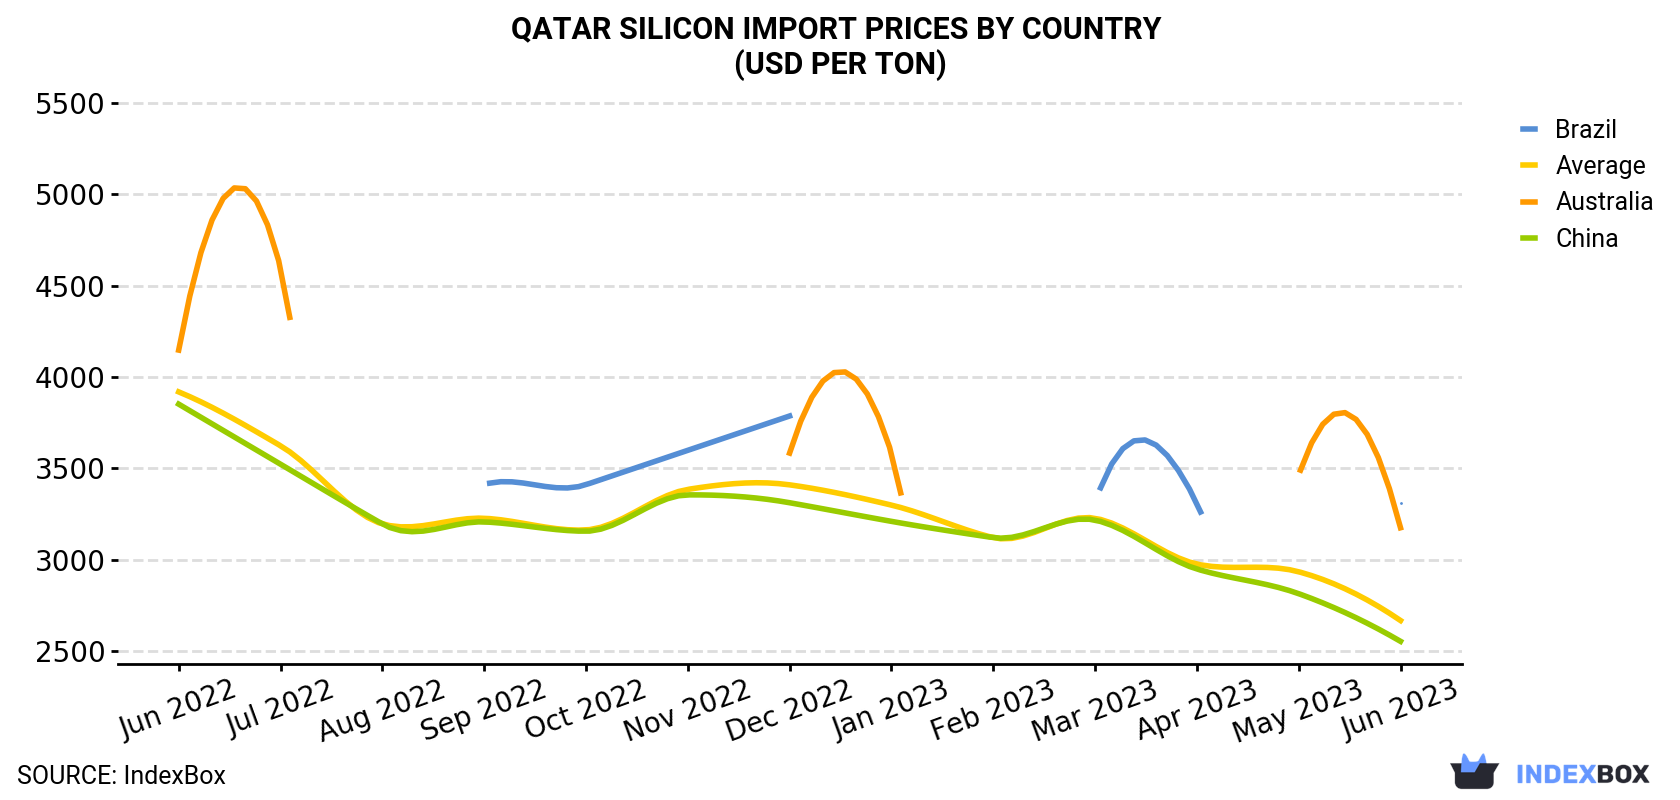 Qatar Silicon Import Prices By Country (USD Per Ton)